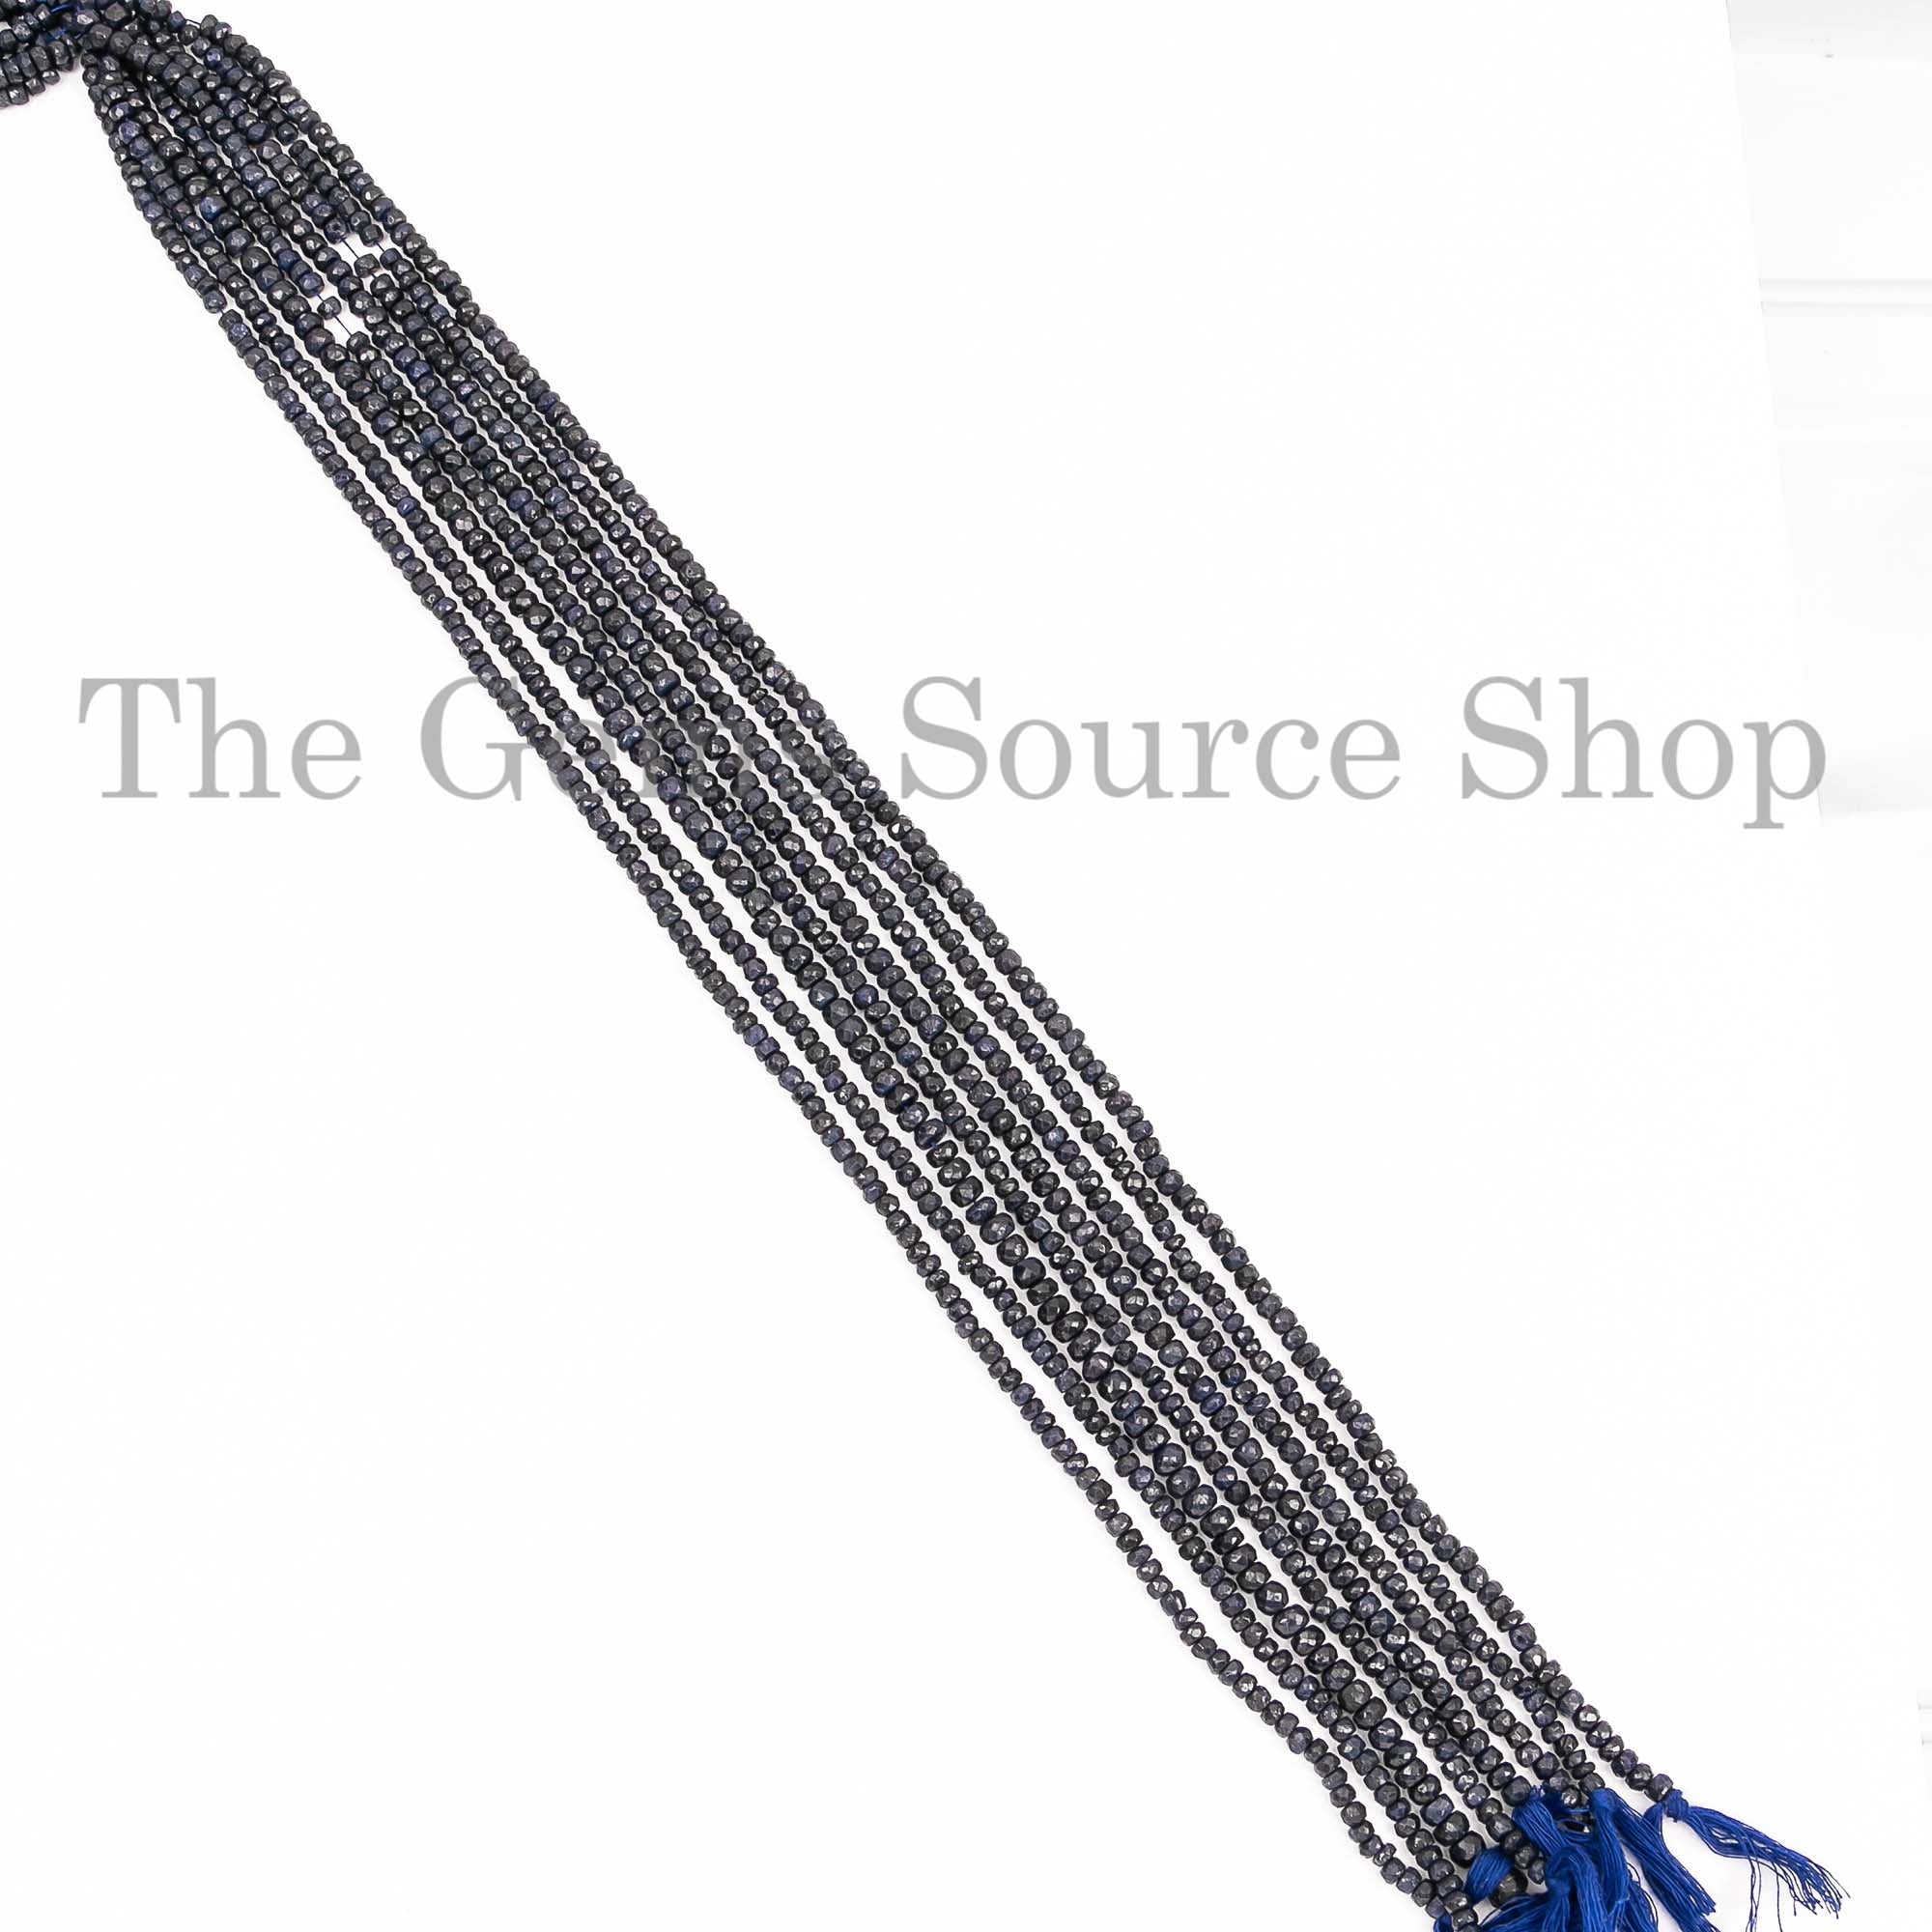 Blue Sapphire Beads, Blue Sapphire Faceted Beads, Blue Sapphire Rondelle Shape Beads, Wholesale Price Beads